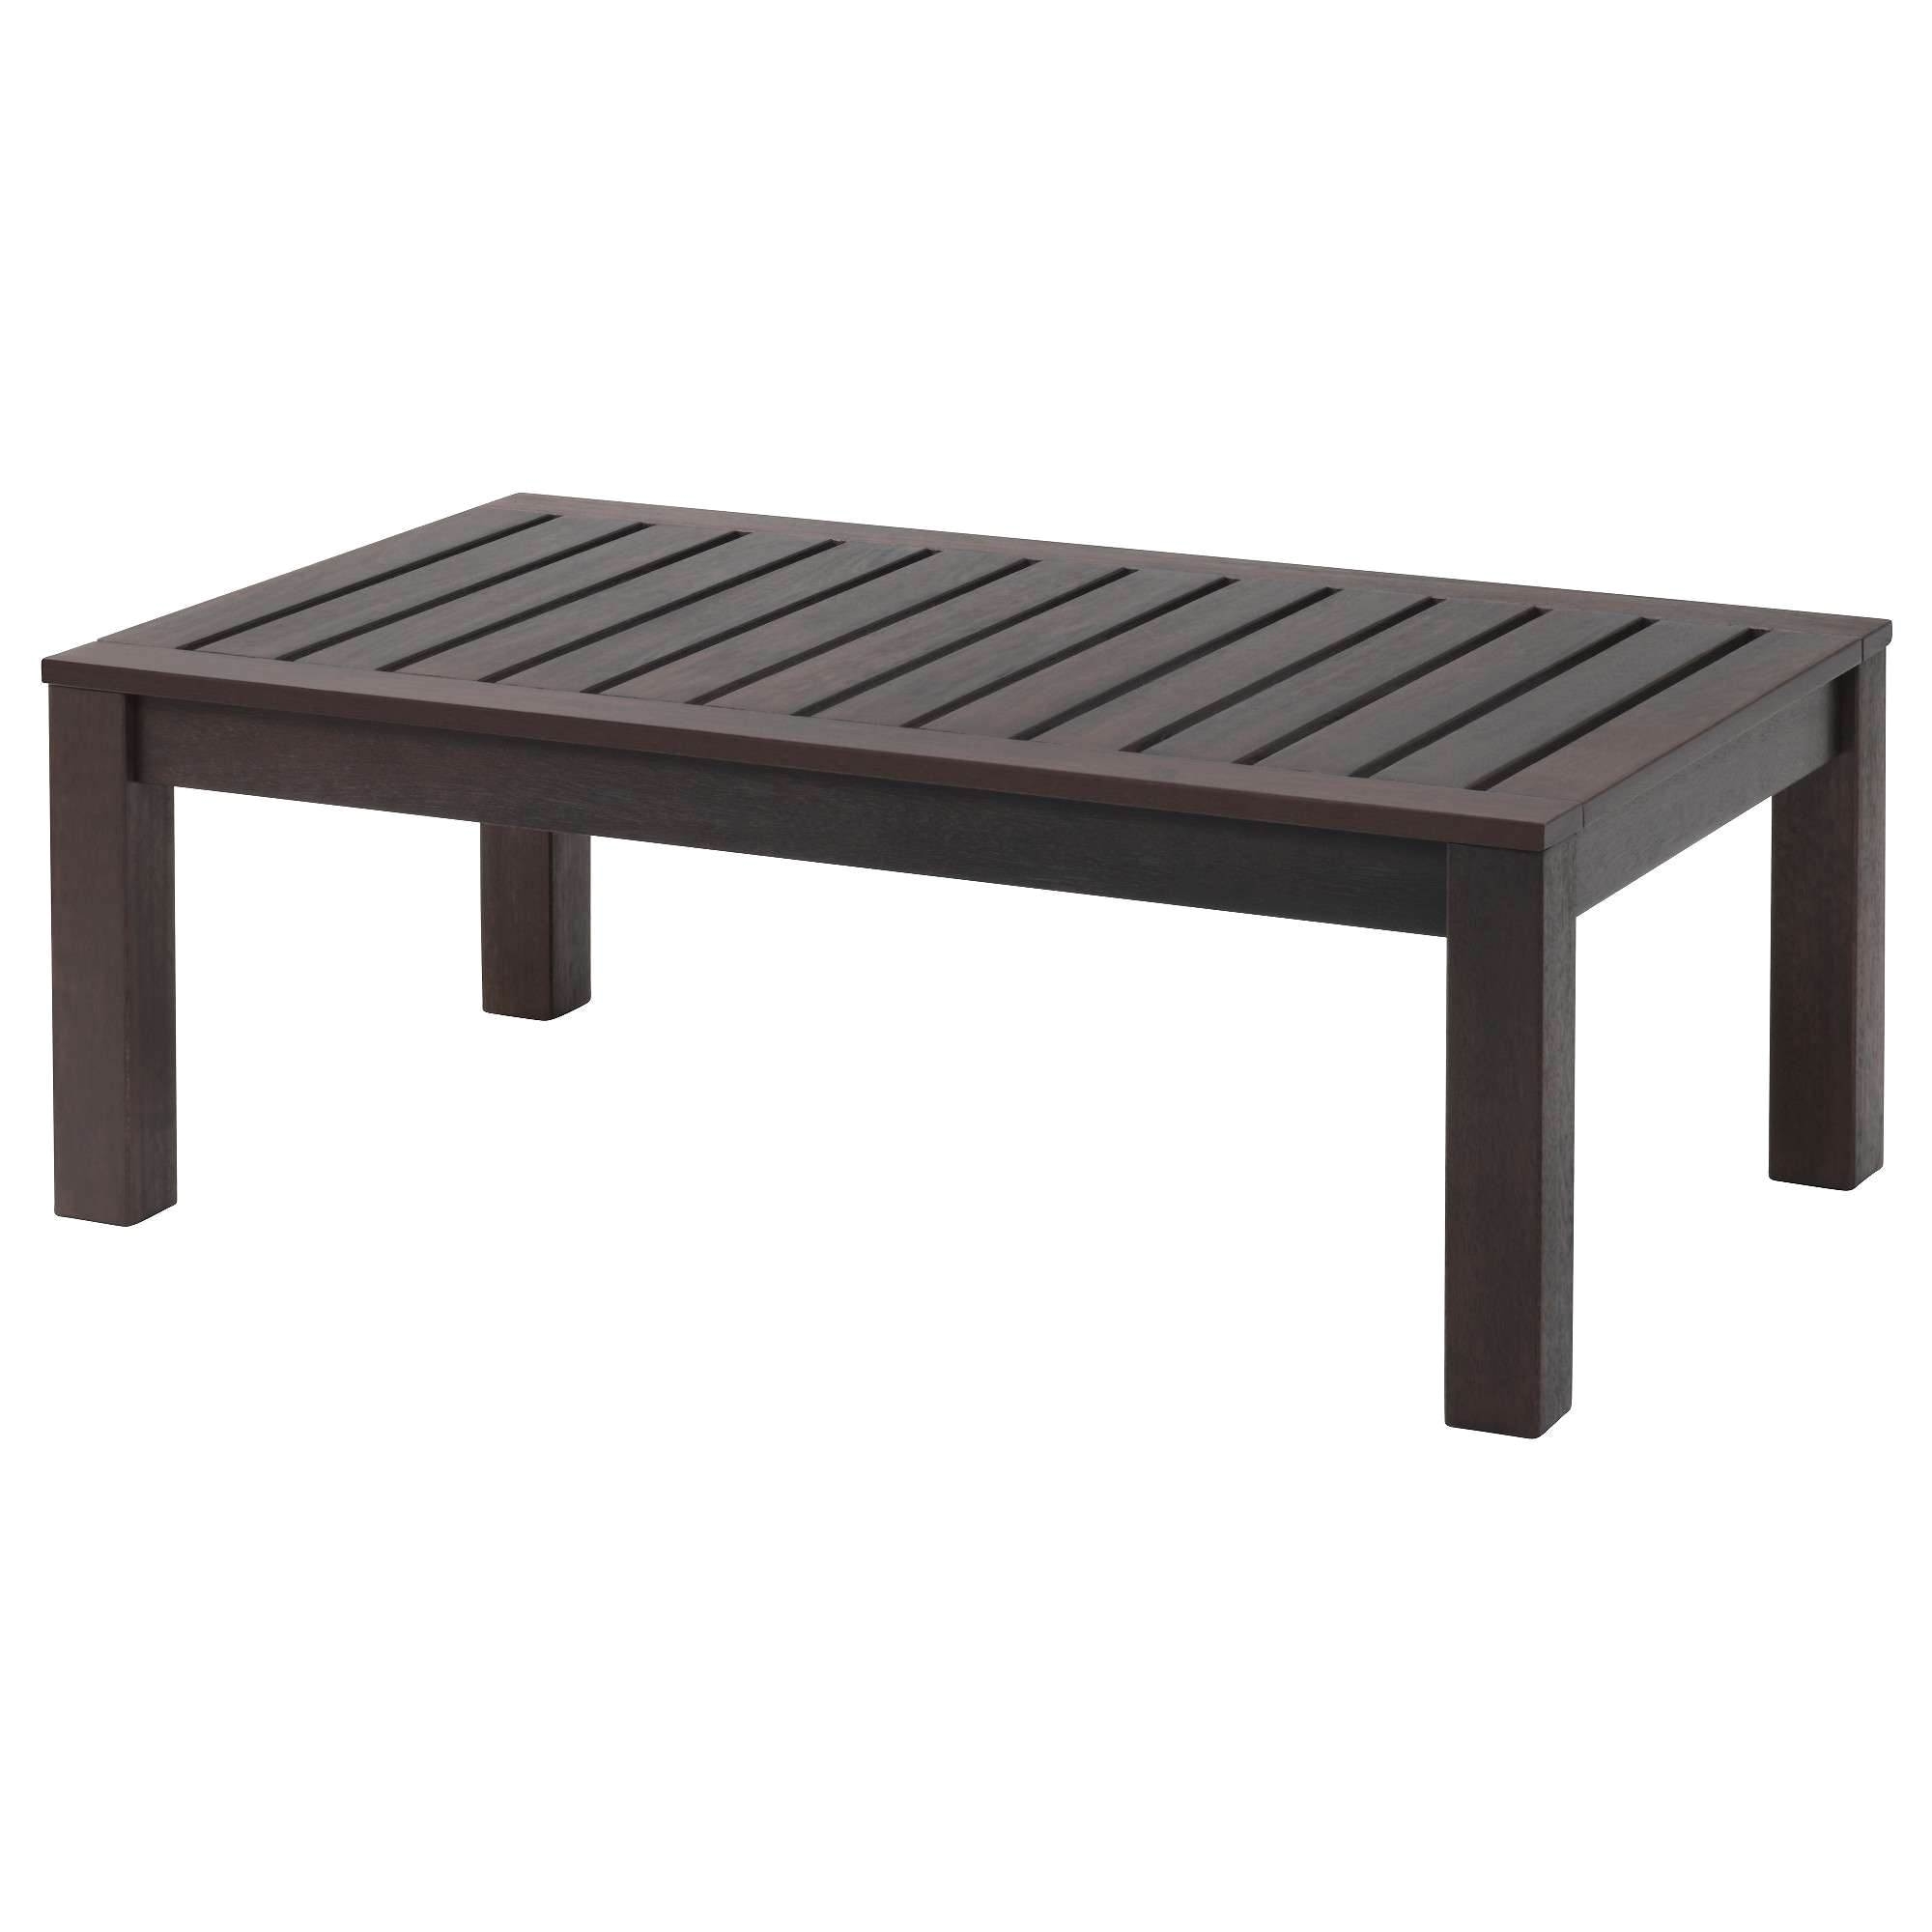 porch bench plans awesome wood patio cover designs new low wooden coffee table luxury tables